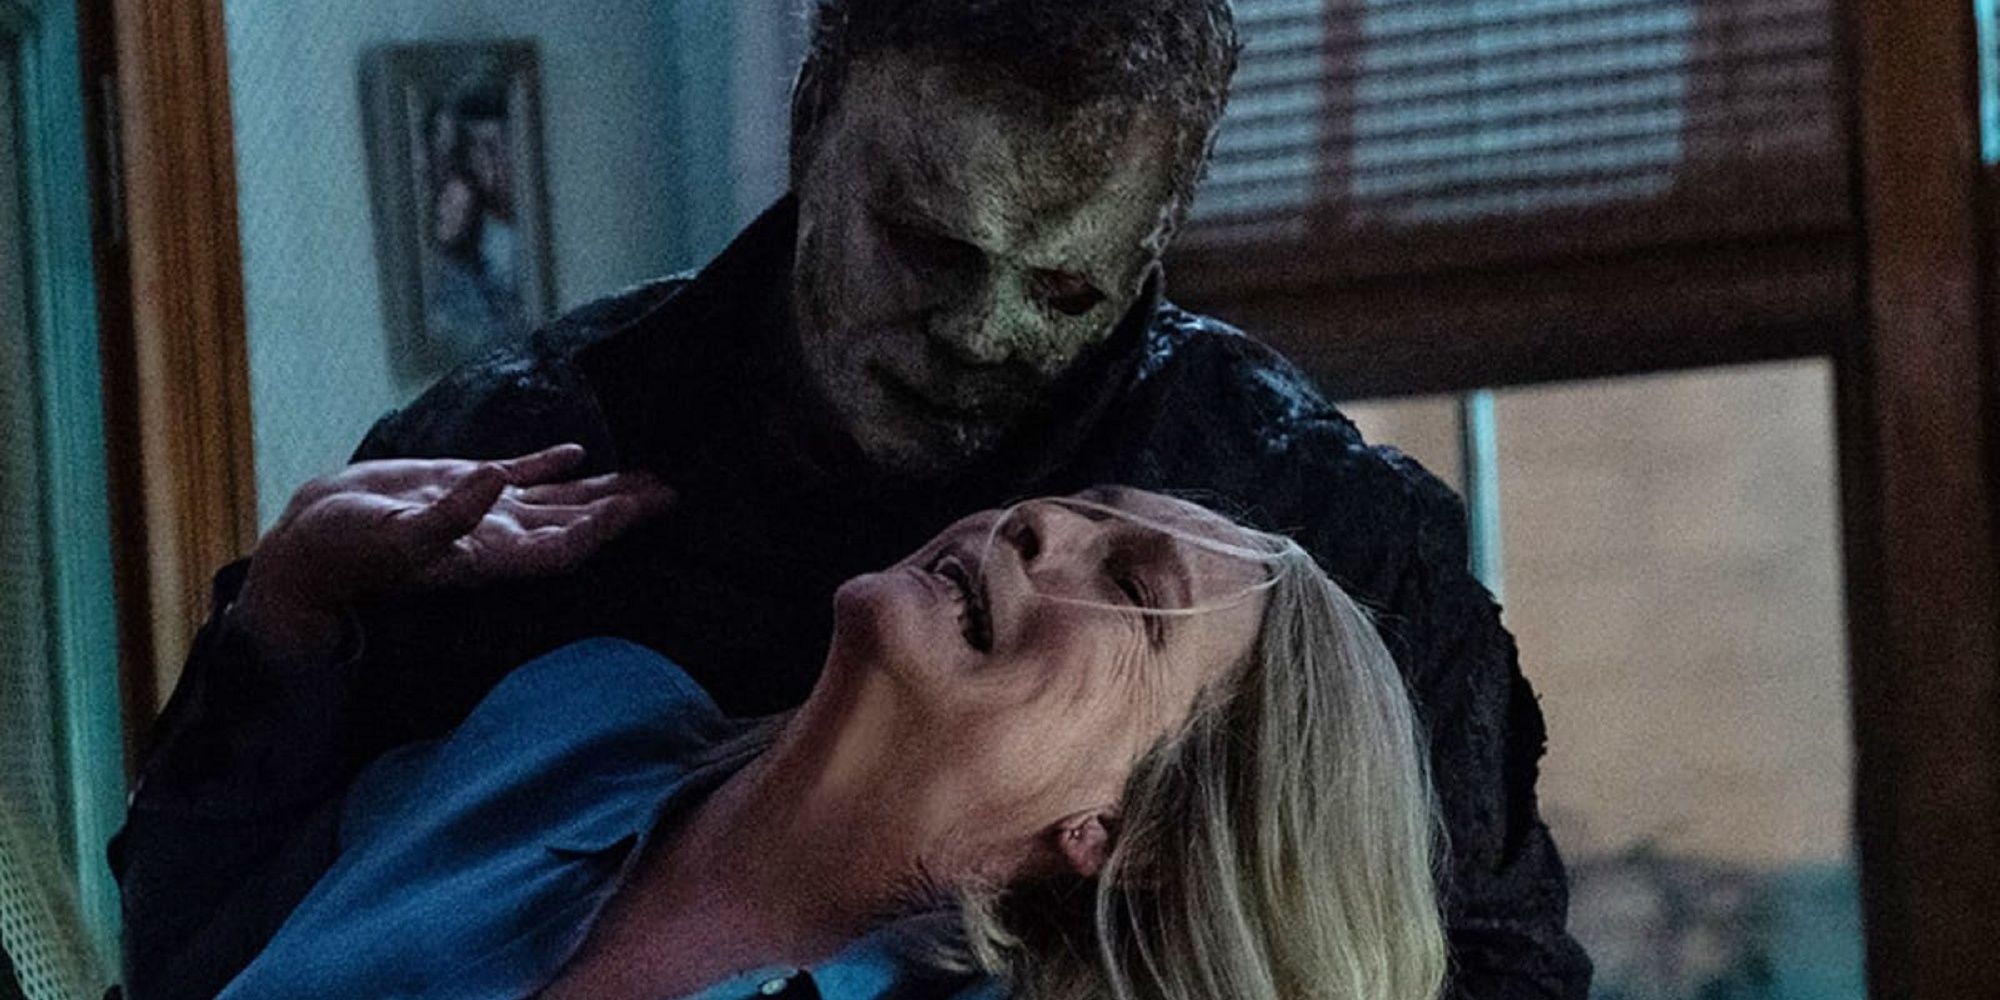 Michael Myers attacking Laurie Strode by pulling her hair back in 'Halloween Ends.'